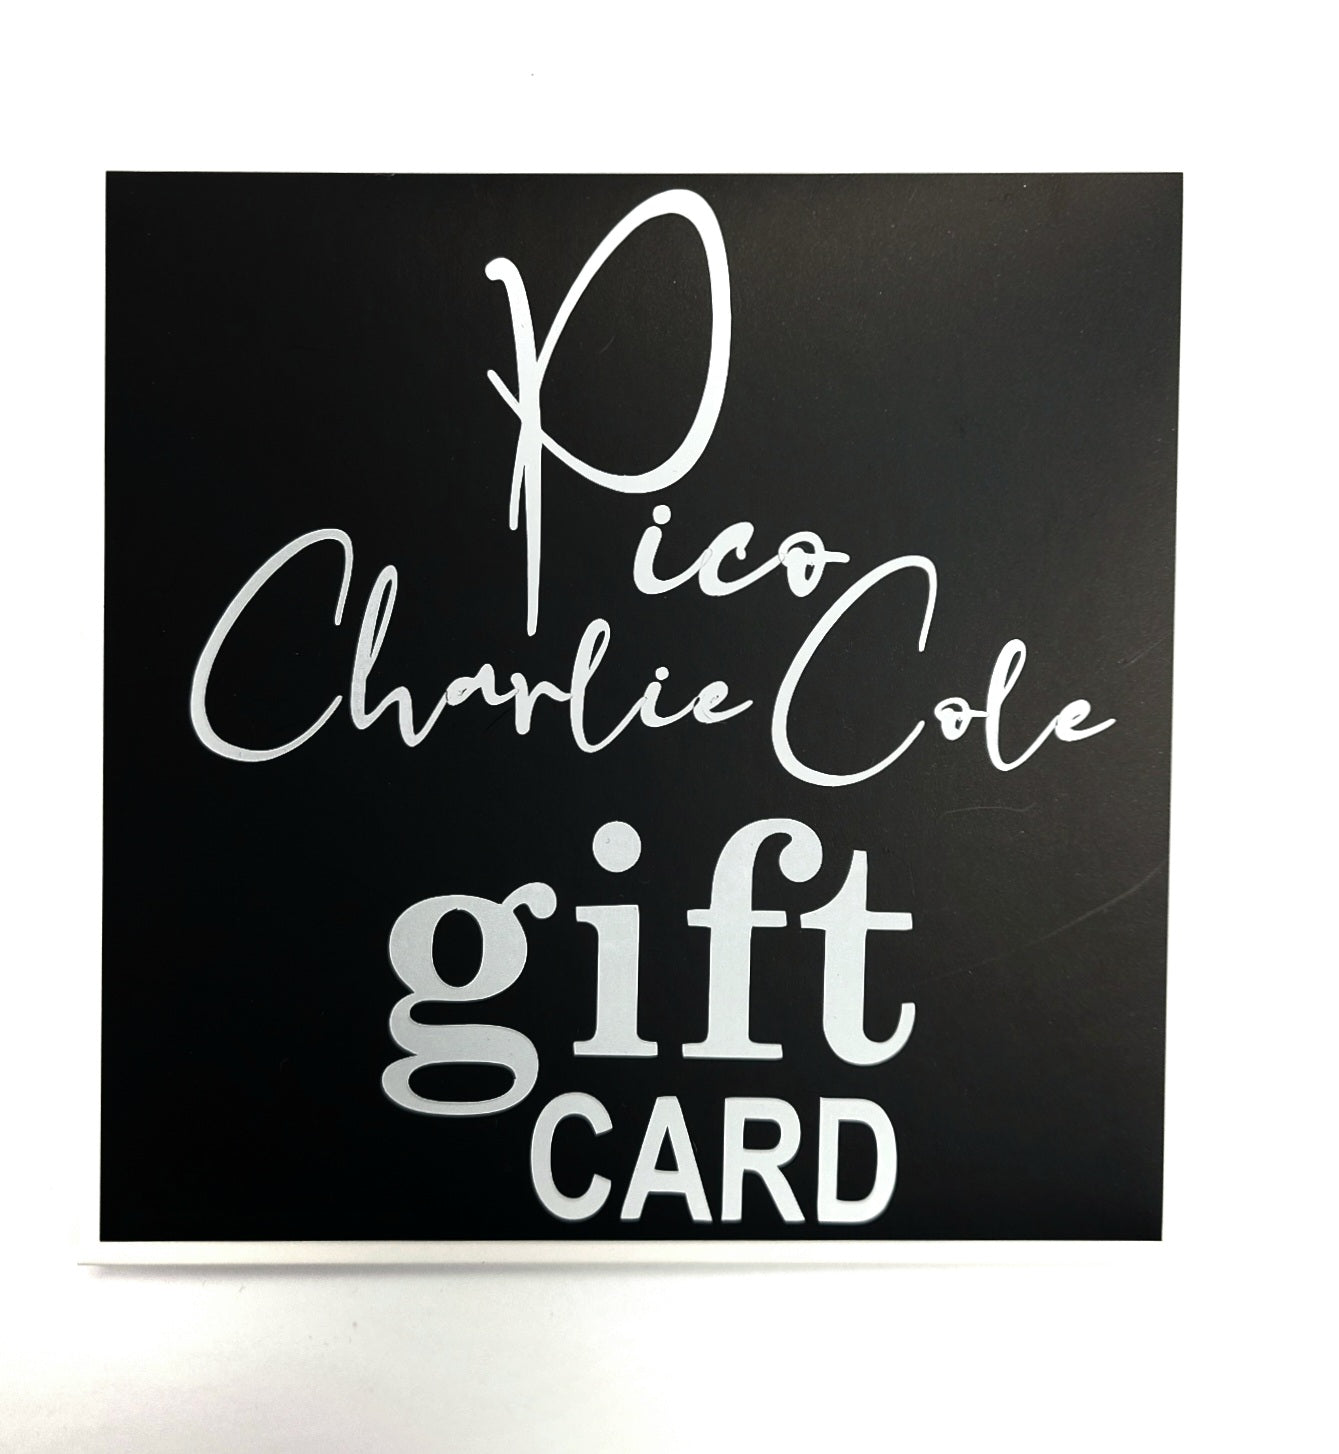 Pico Charlie Cole Gift Card